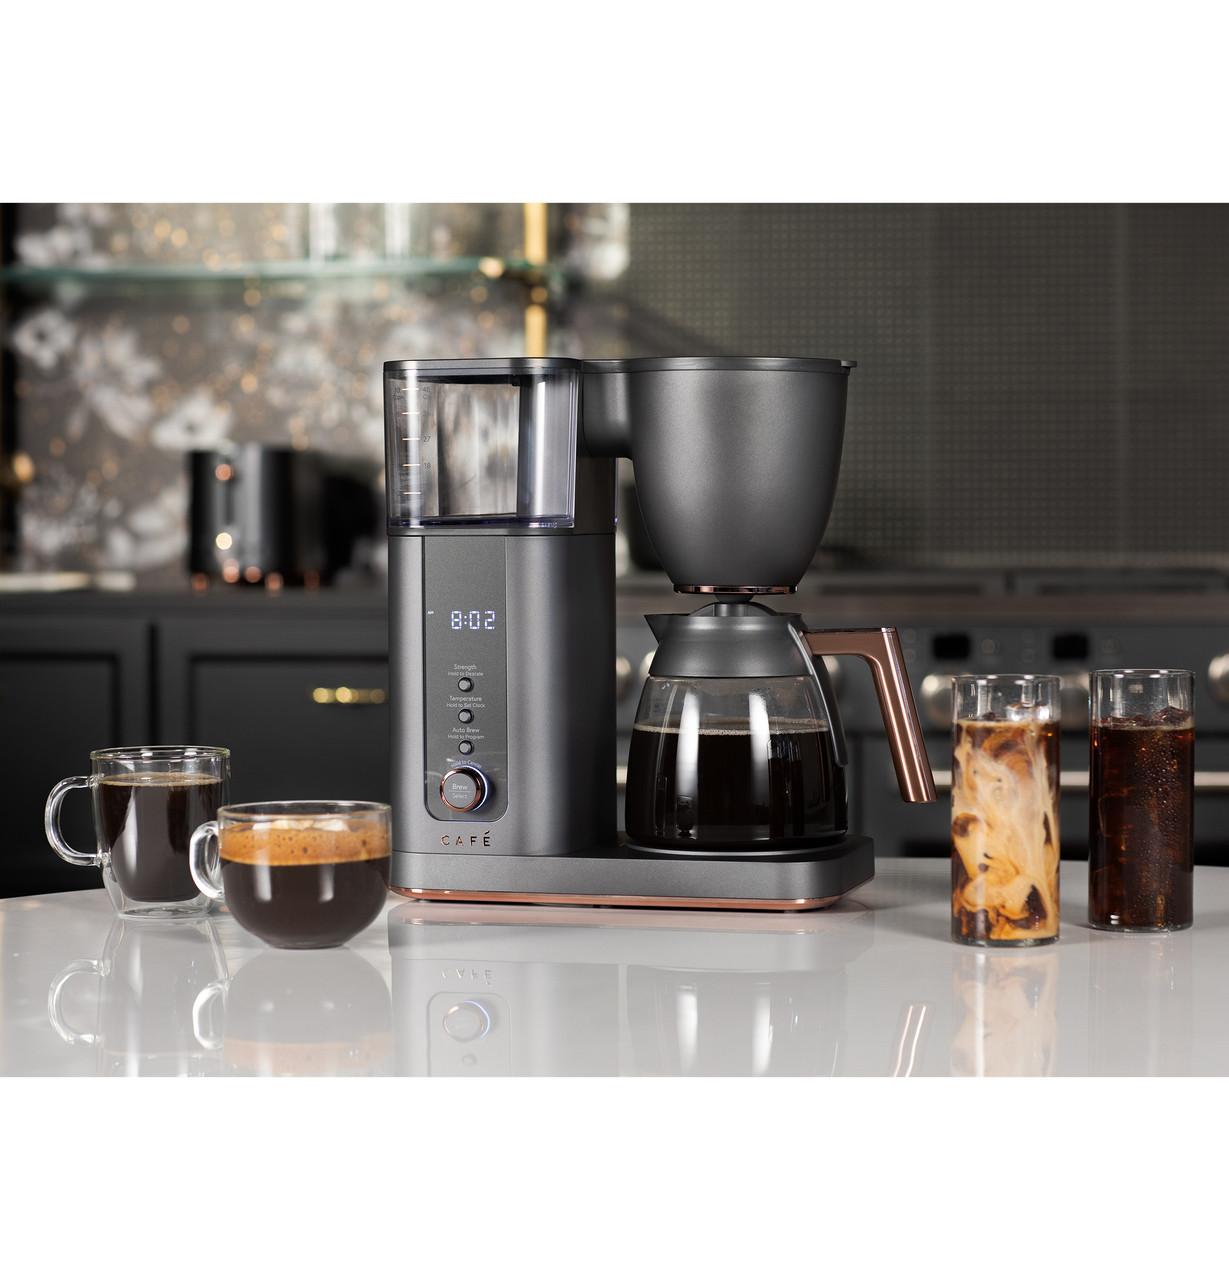 Cafe Specialty Drip Coffee Maker with Glass Carafe in Stainless